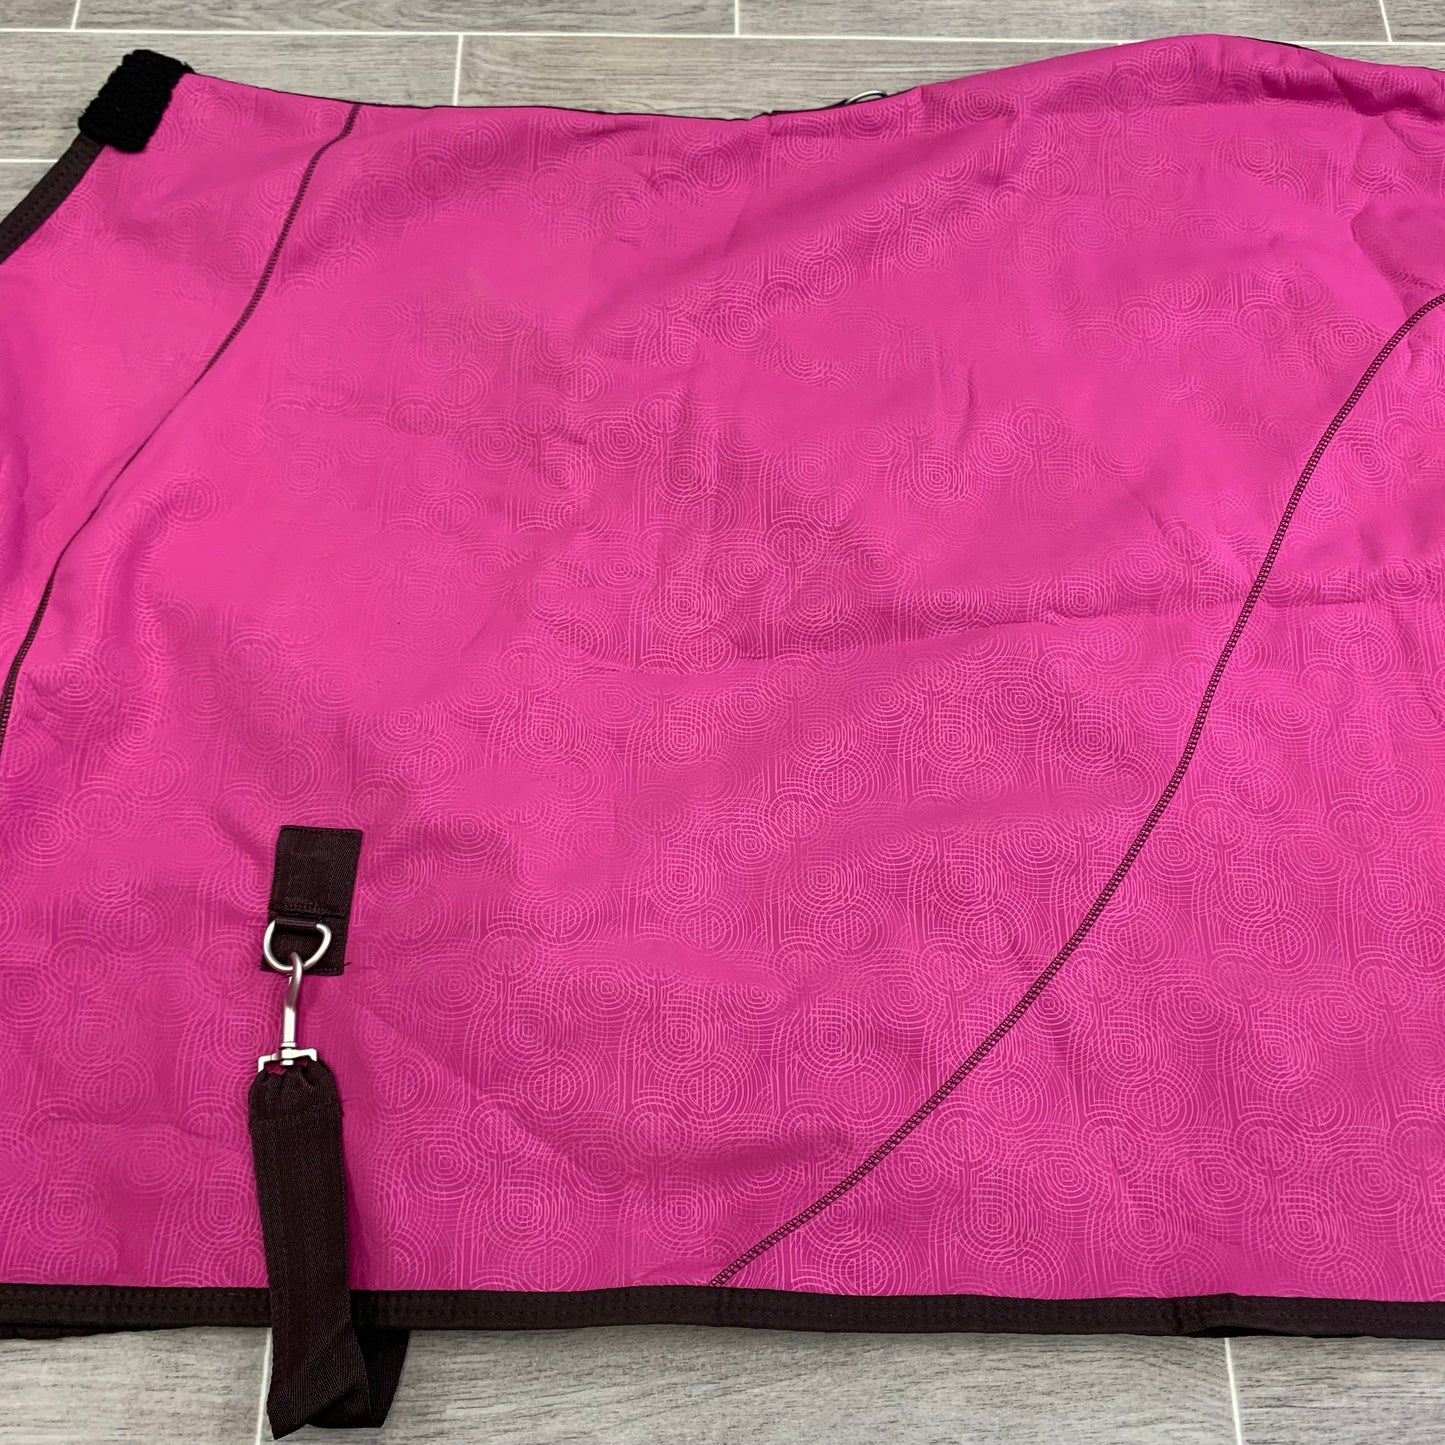 **CLEARANCE** Fenwick Softshell Dress Blanket Cooler with Sherpa Fleece Lining, Pink (Sizes: 62", 66", 70", 78" & 82")